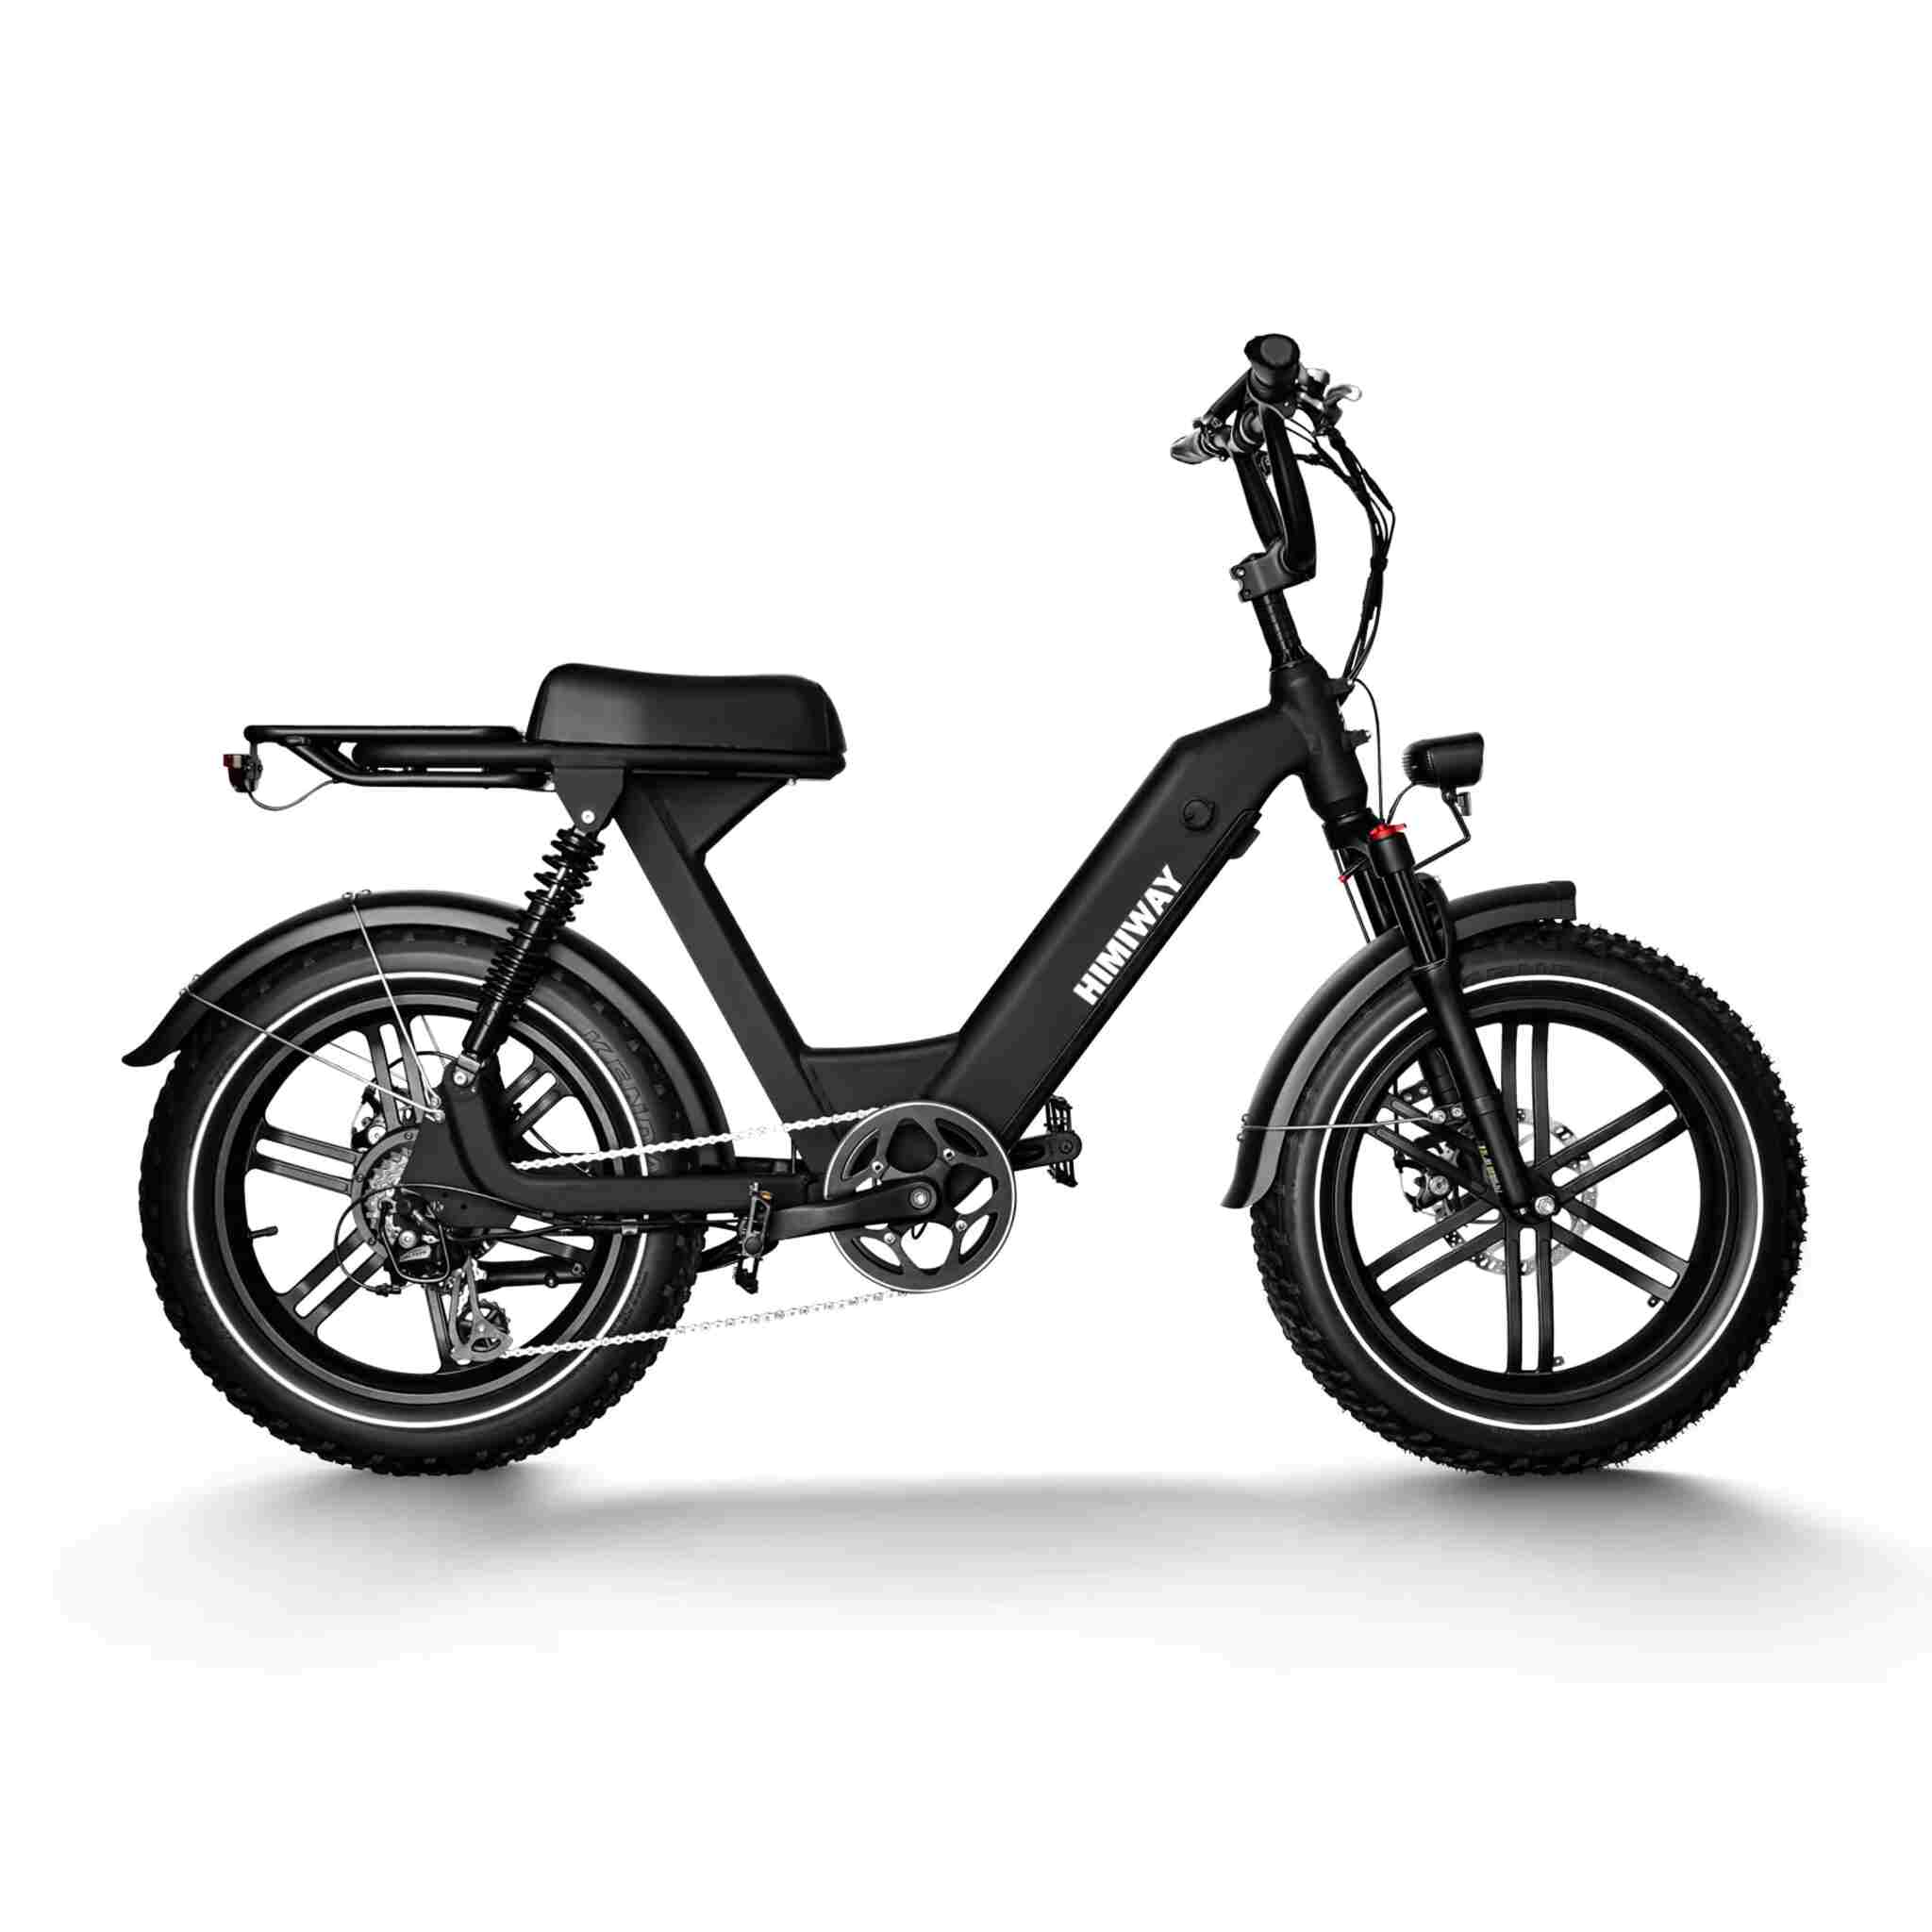 Himiway Escape Pro - Himiway Moped E-Bike - MabeaMobility